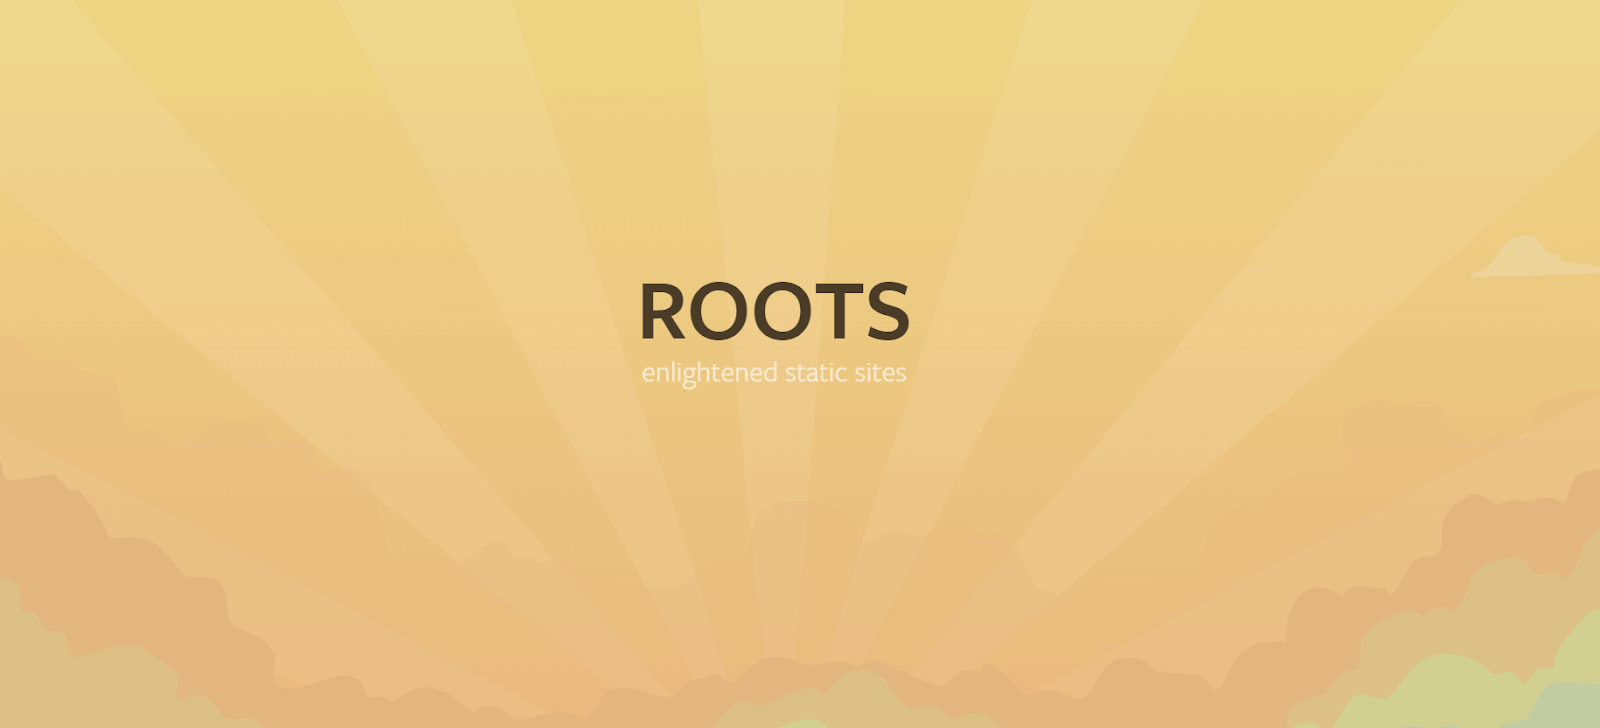 Roots is known for its flexibility and adaptability